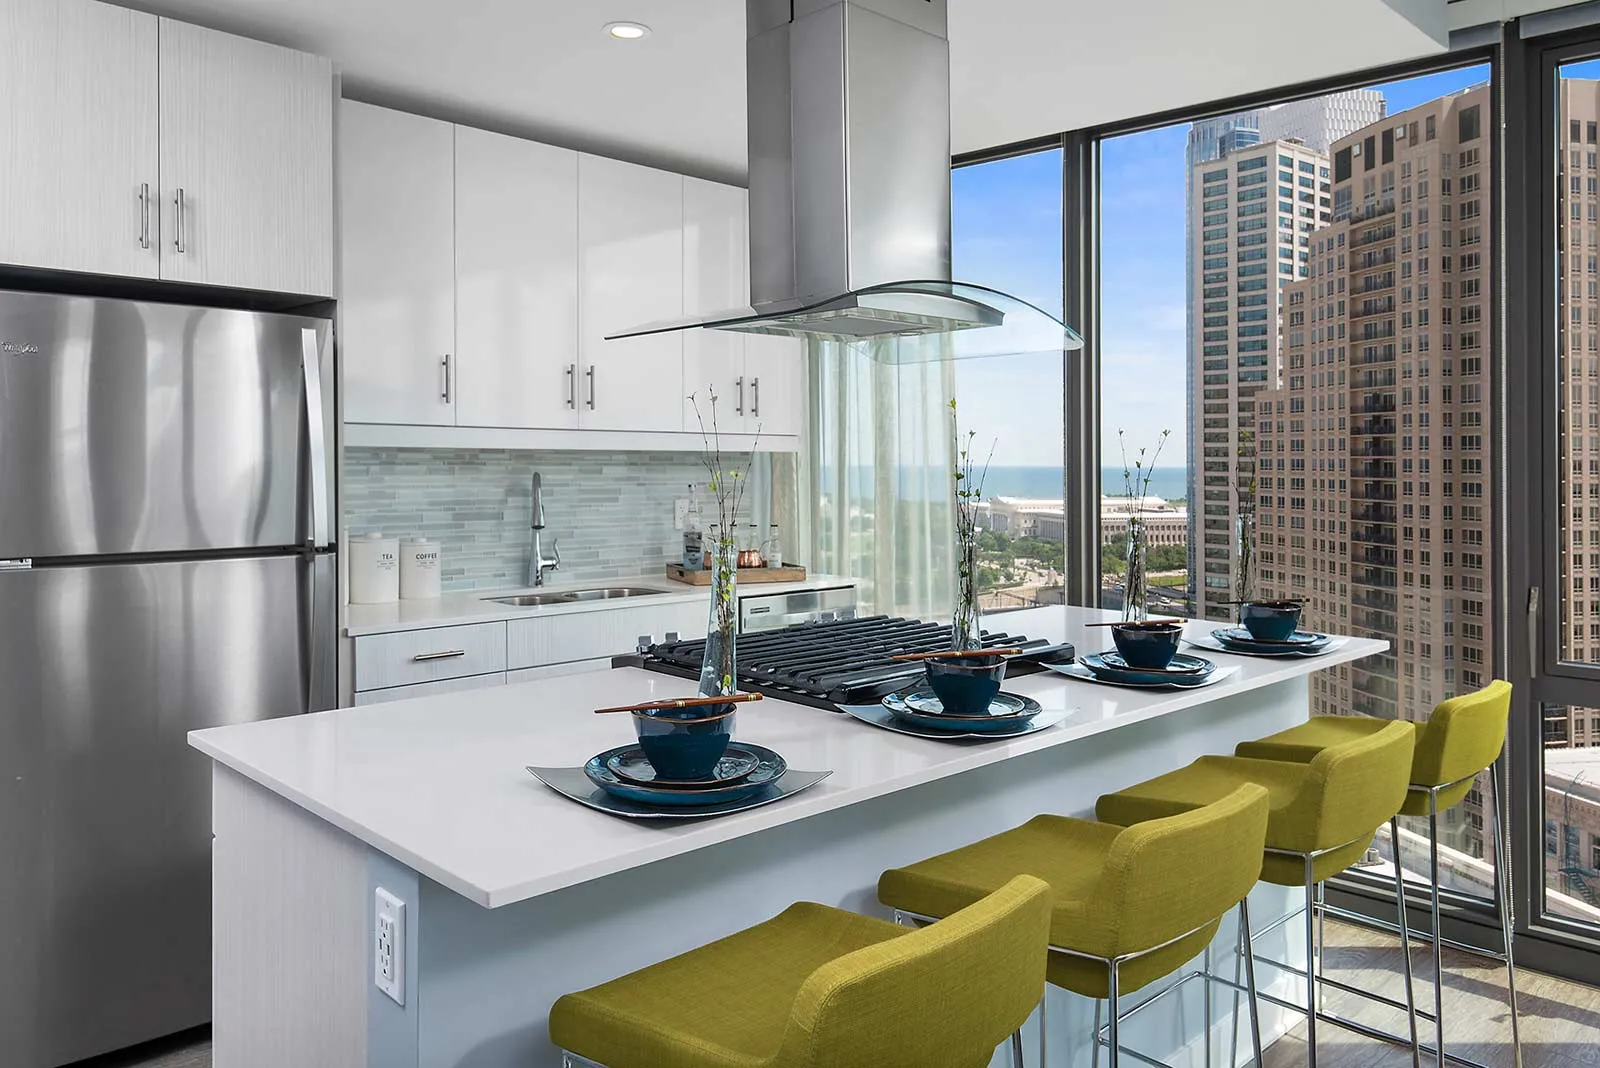 luxury kicthen and island at 1001 South State Apartments in the South Loop